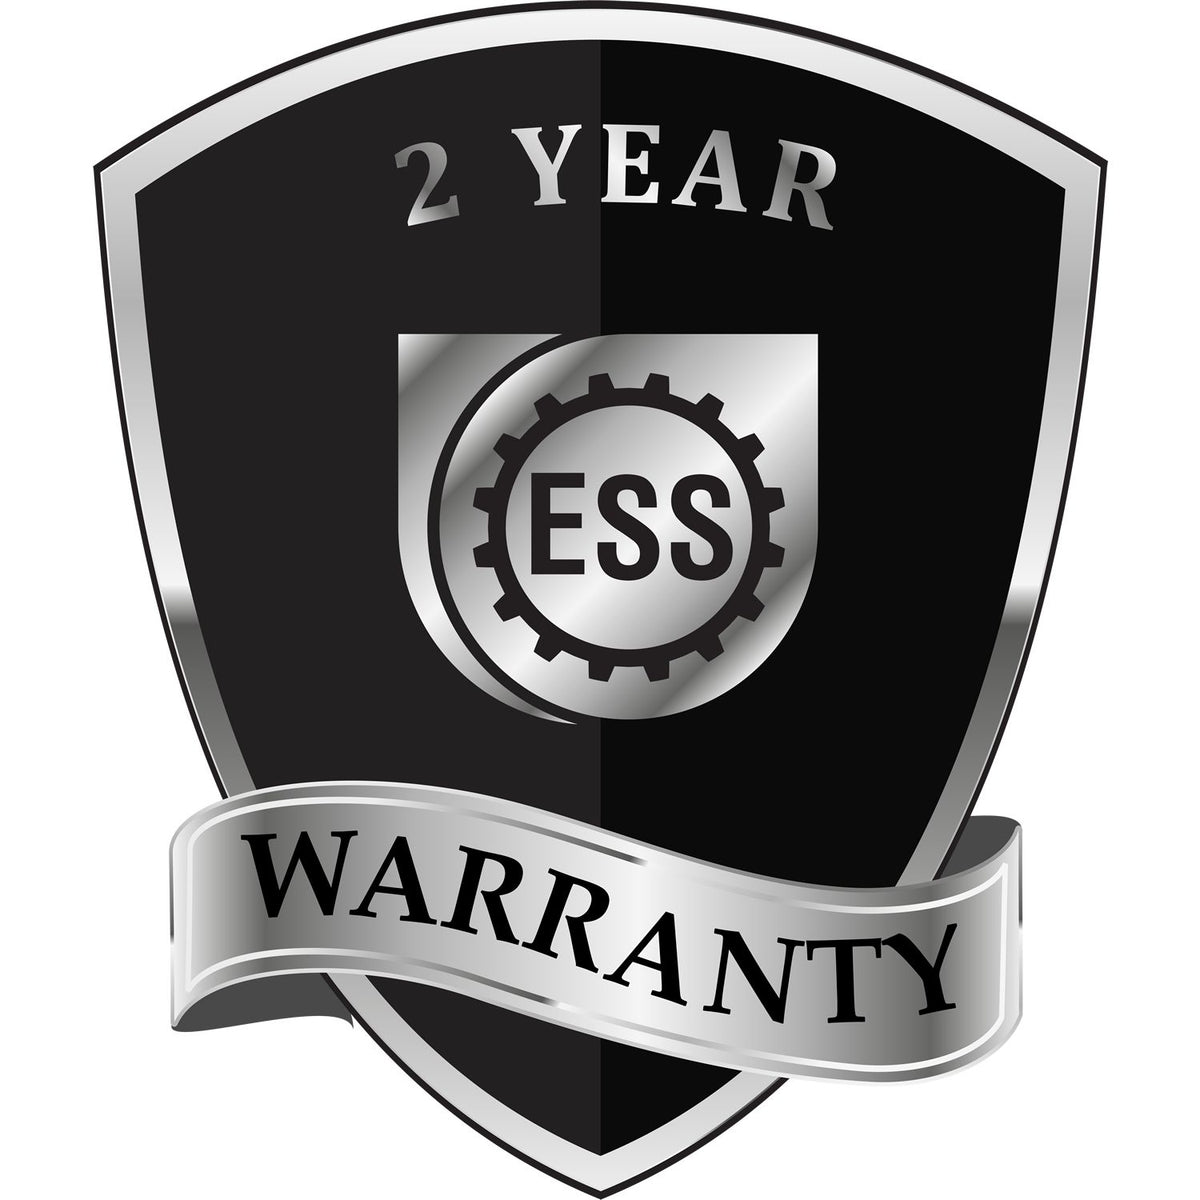 A black and silver badge or emblem showing warranty information for the Gift New York Engineer Seal